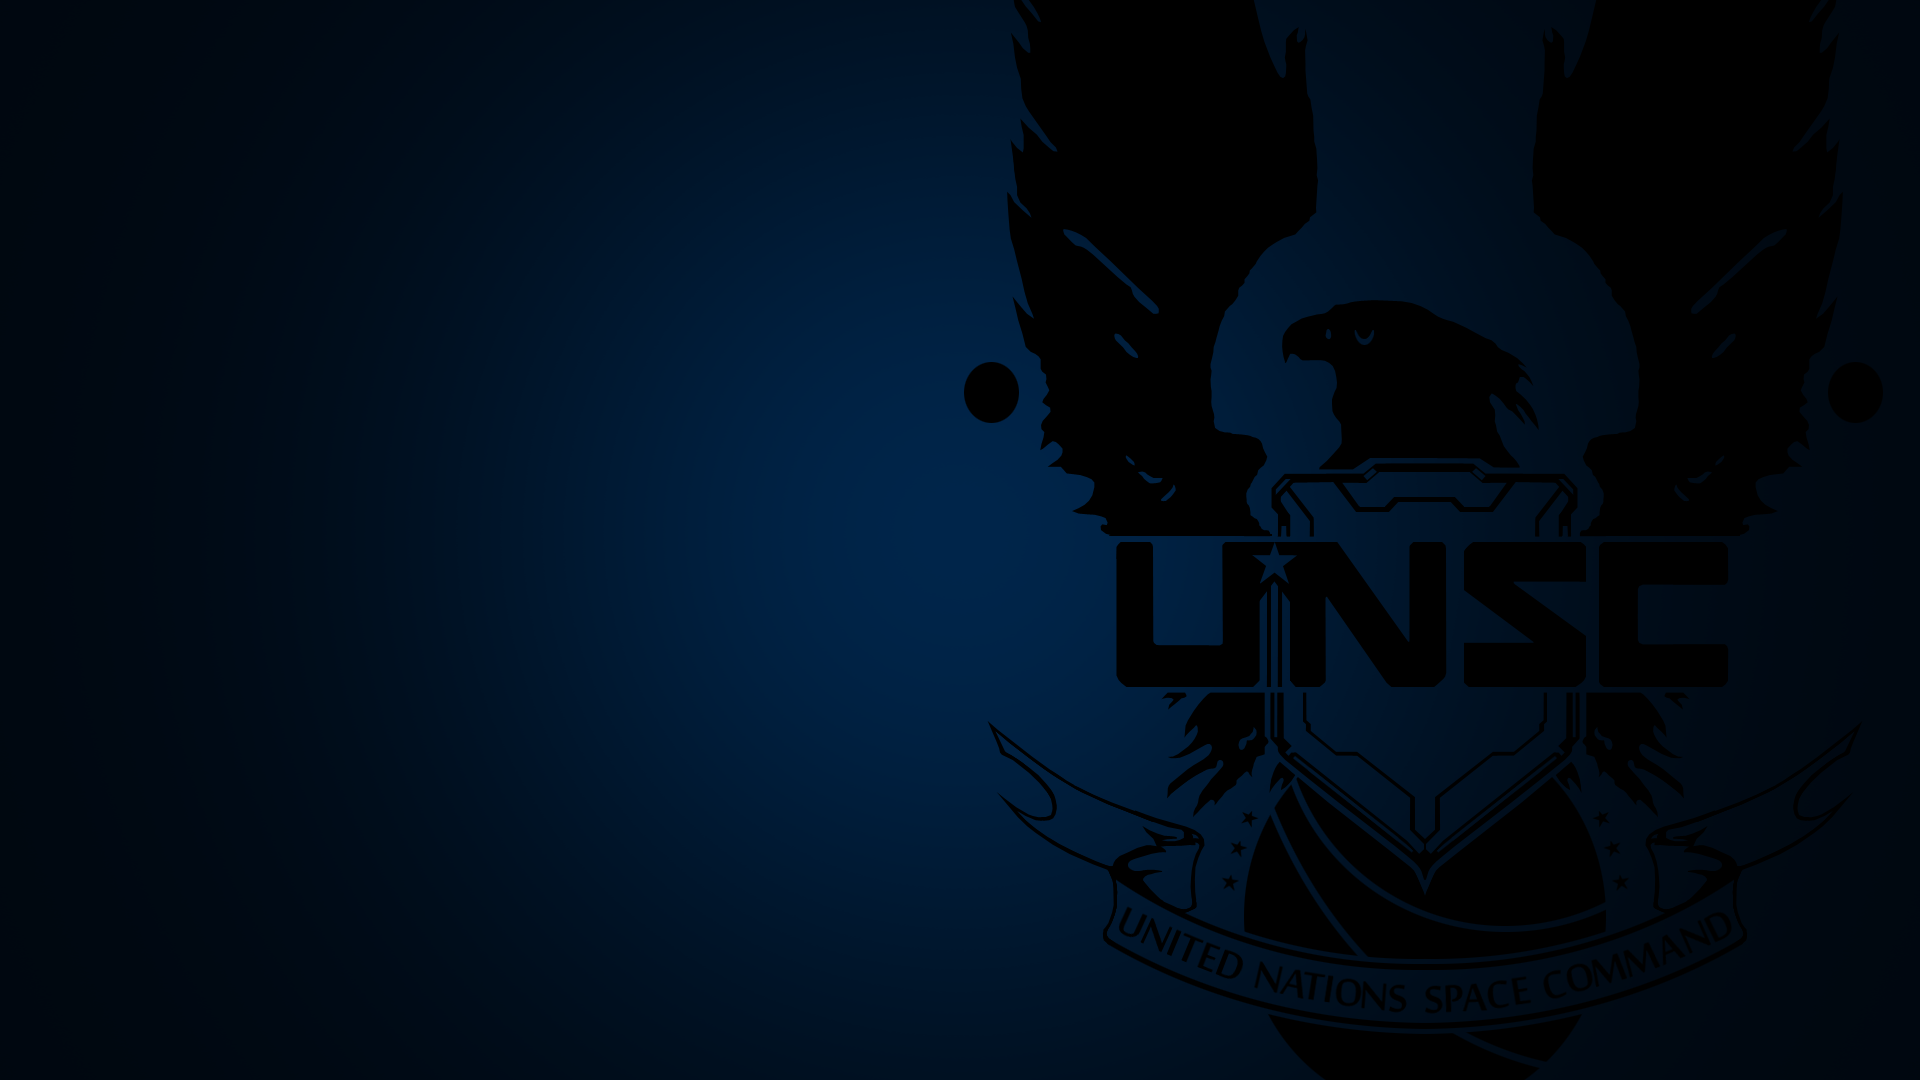 Wallpaper For > Halo Unsc Wallpaper